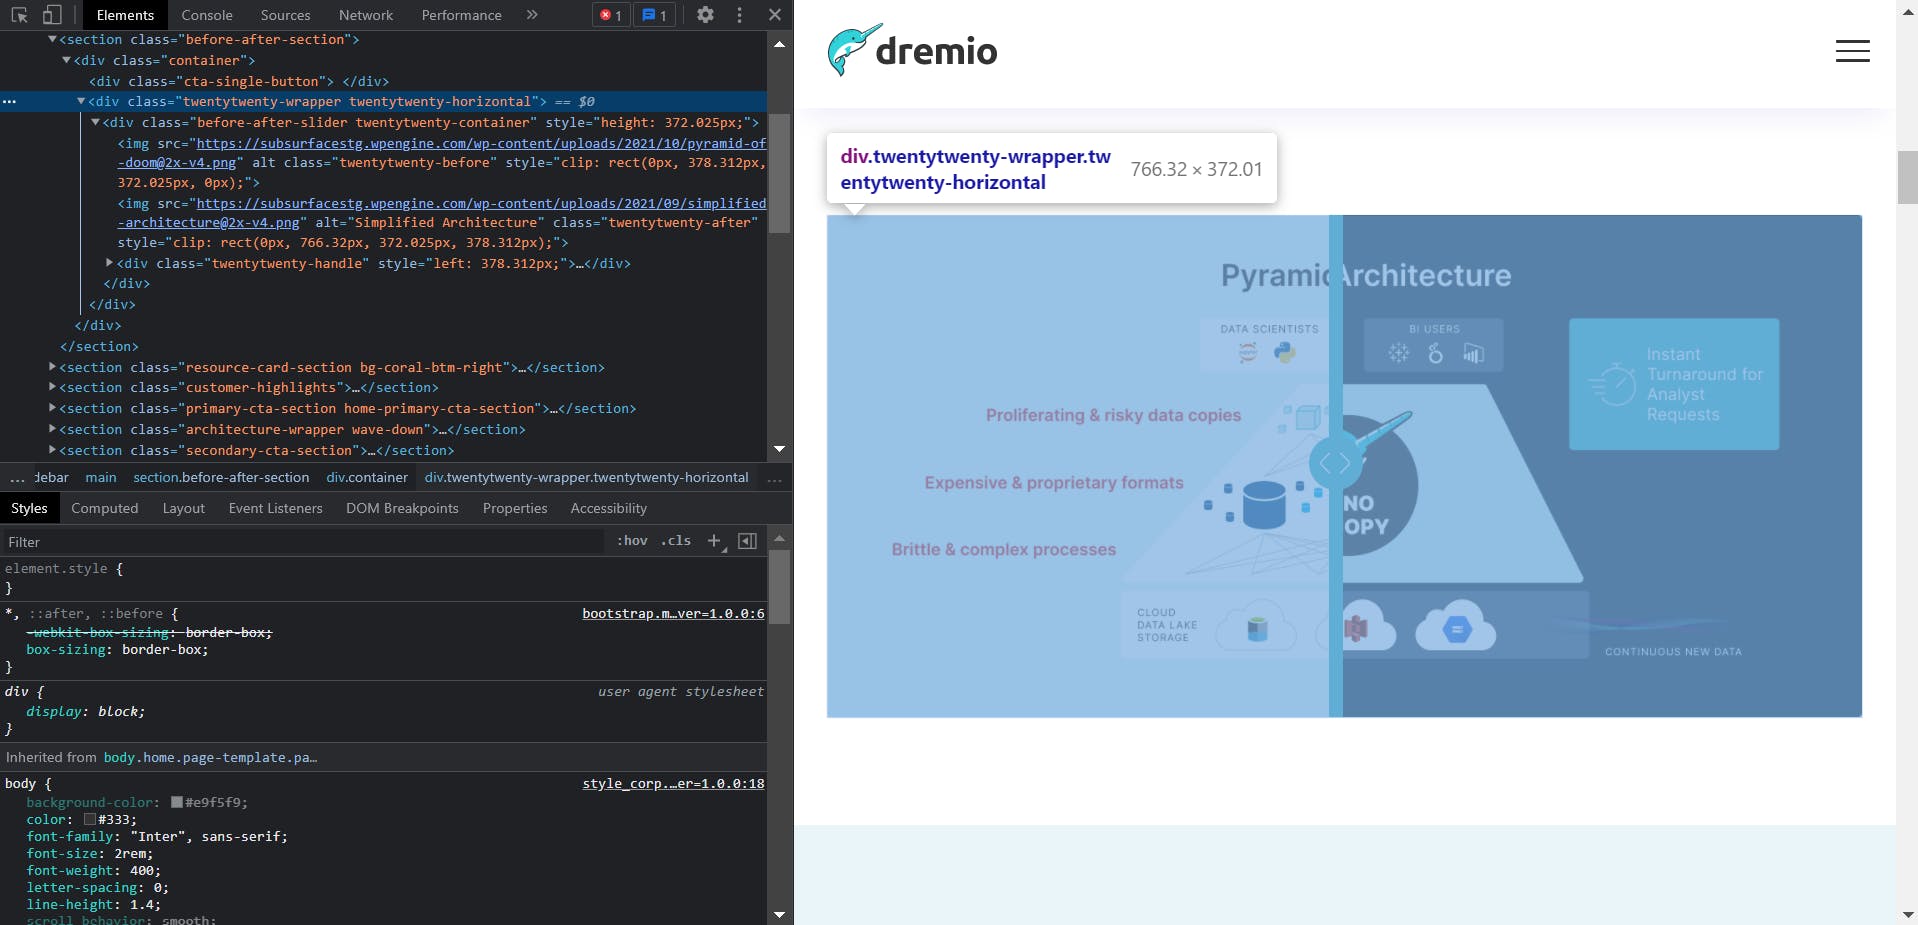 Inspecting Dremio component.png